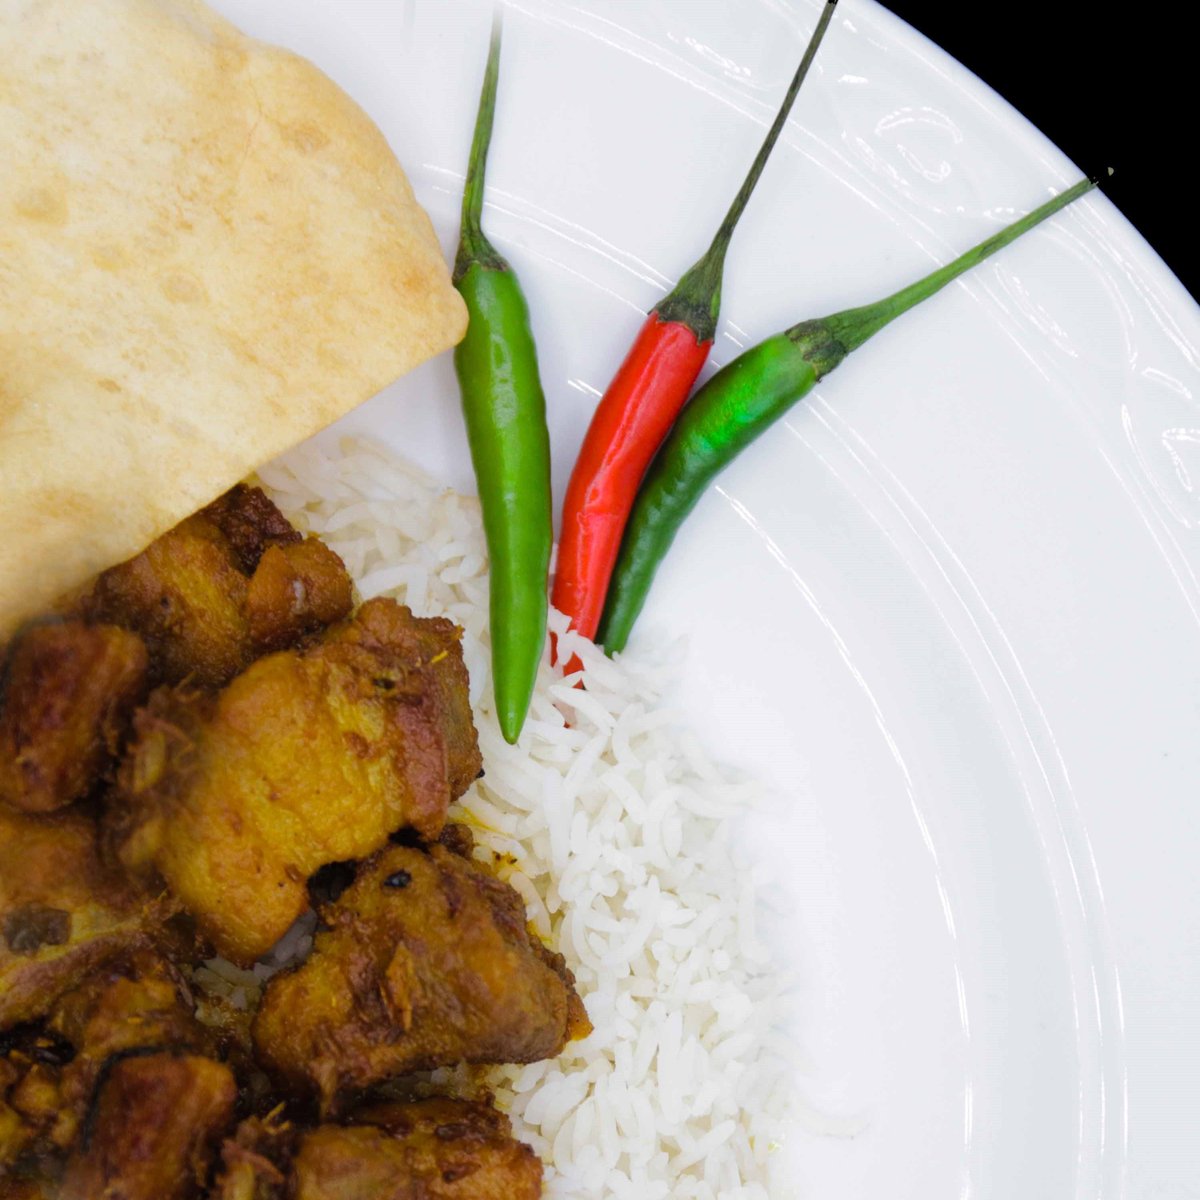 Treat yourself this autumn to a Gurkha curry lunch 🍛
With four different curries to enjoy as well as drinks and dessert, our monthly curries are not to be missed!
thegurkhamuseum.co.uk/event/gurkha-c…
#winchesteruk #hampshire #winchestermums #visitwinchester